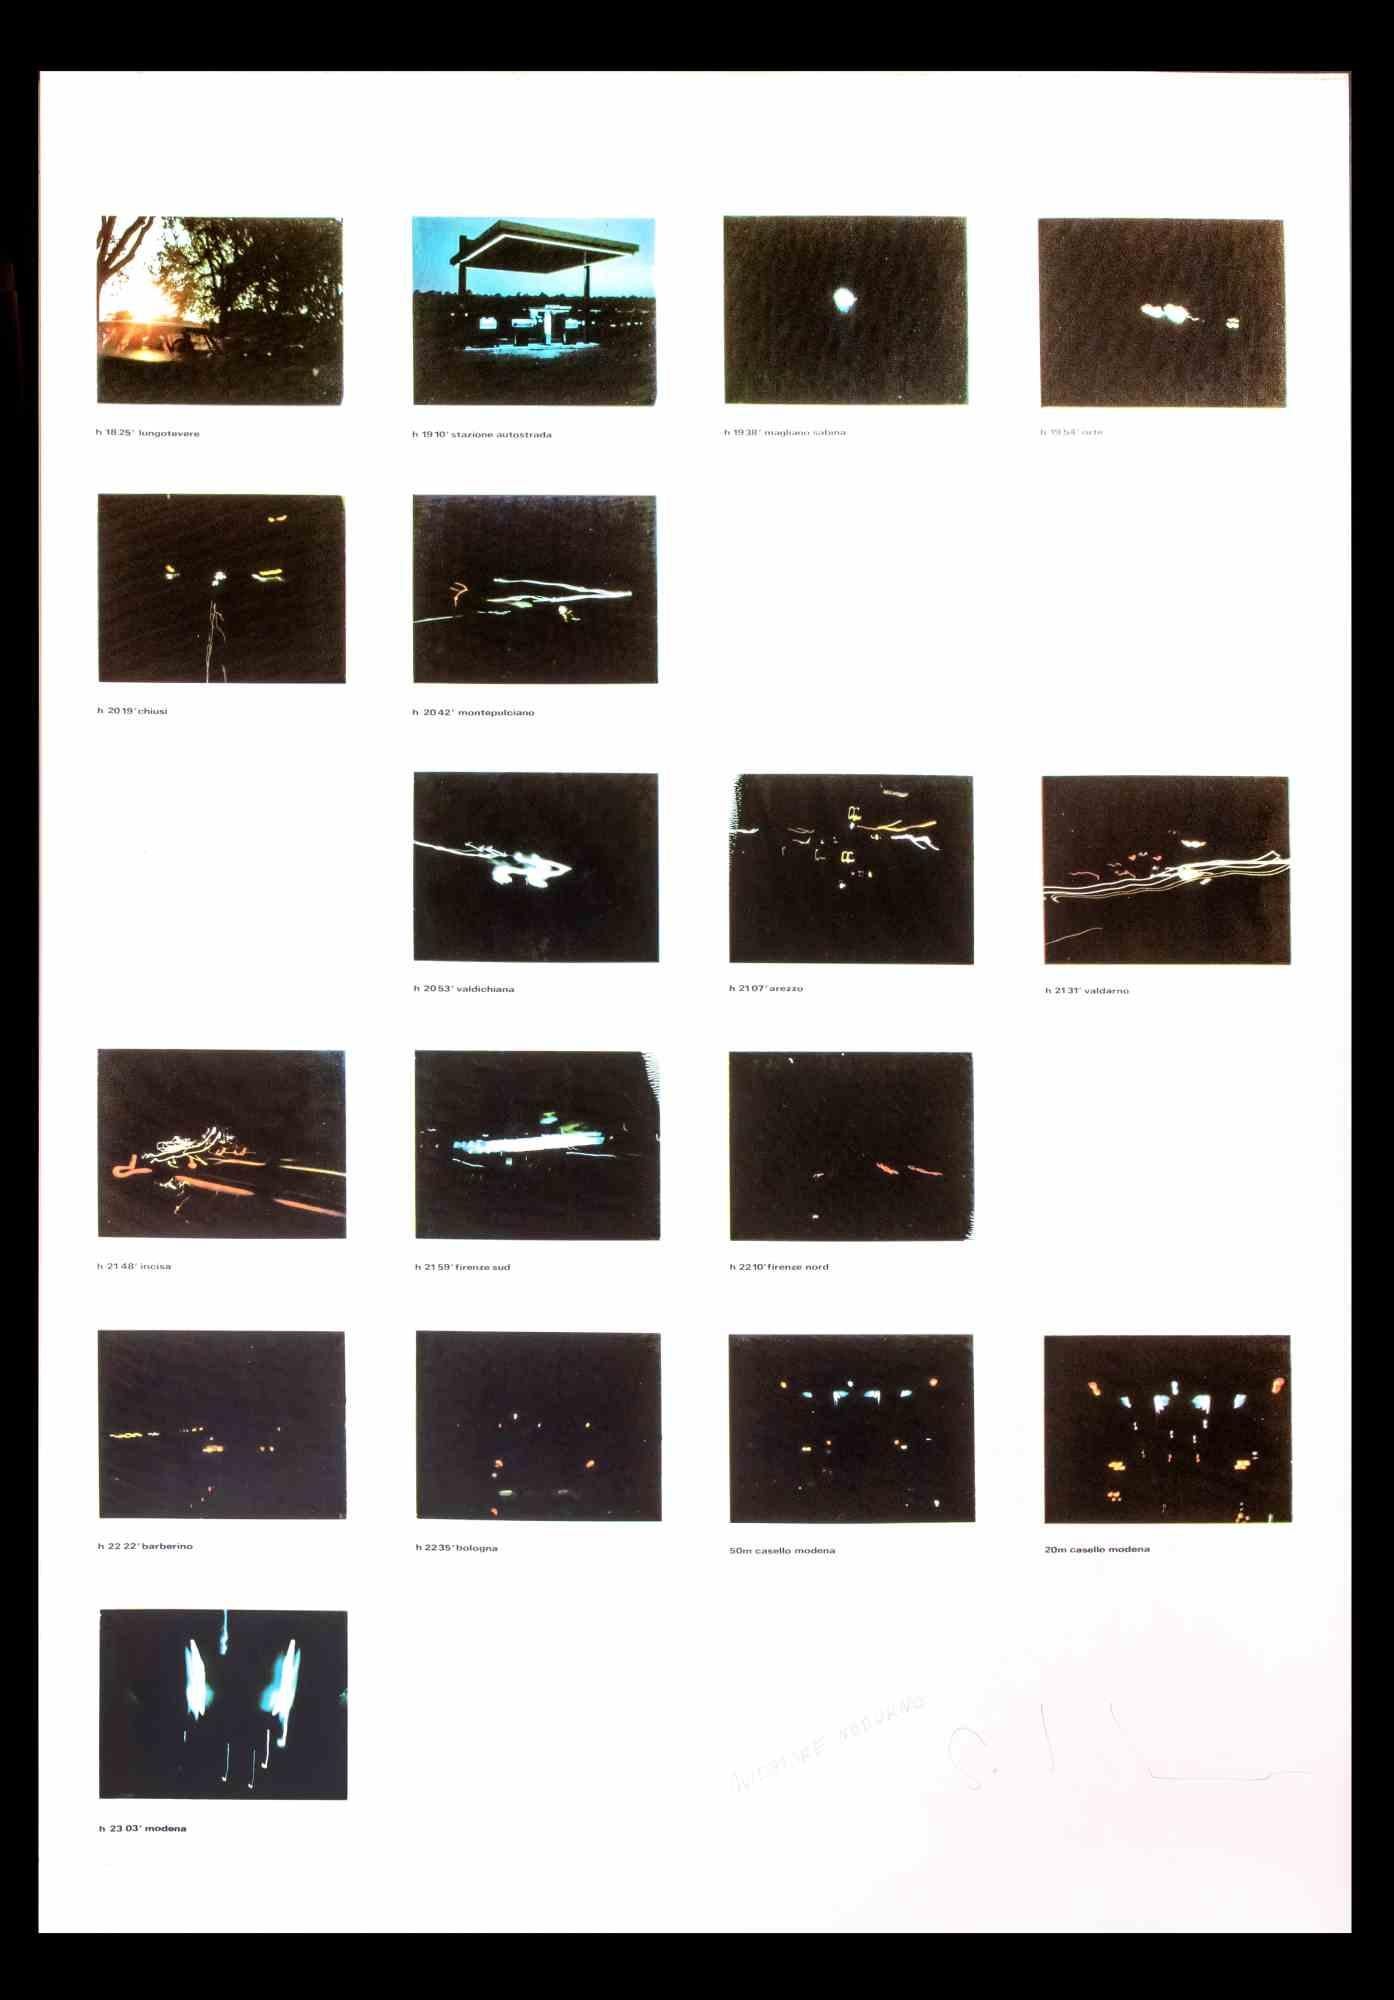 Night Driver is an original contemporary artwork realized by Mario Schifano in the 1970s.

Hand-signed and titled on the lower margin.

Good conditions.

The artwork represents 17 photographs in different places and different times of the night.